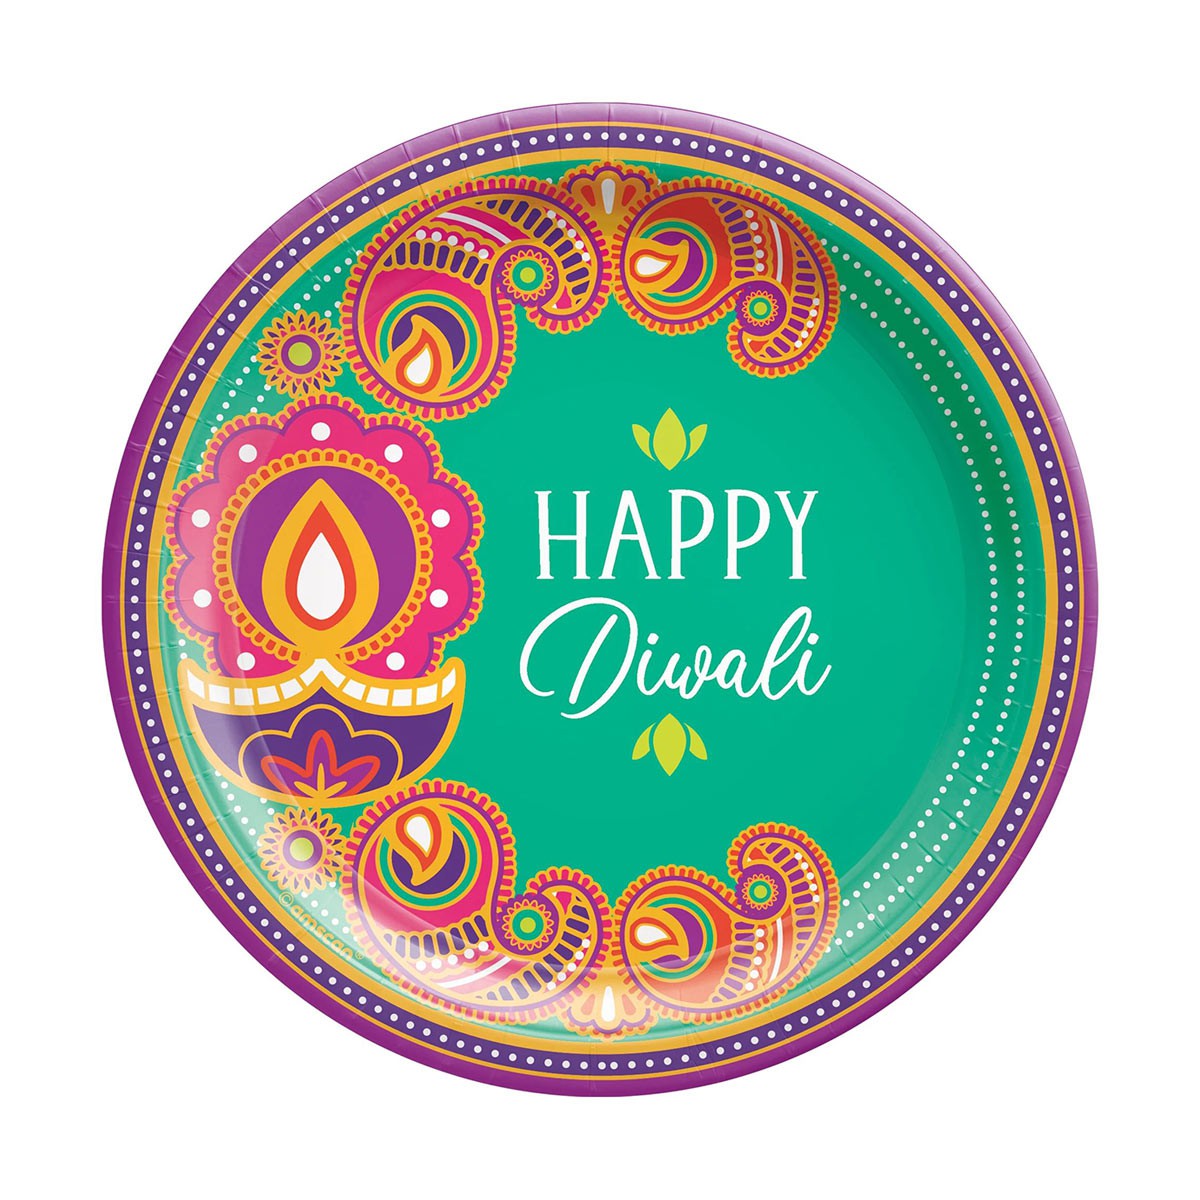 AMSCAN CA Diwali Happy Diwali Small Round Paper Plates, 7 Inches, 8 Count 192937343937